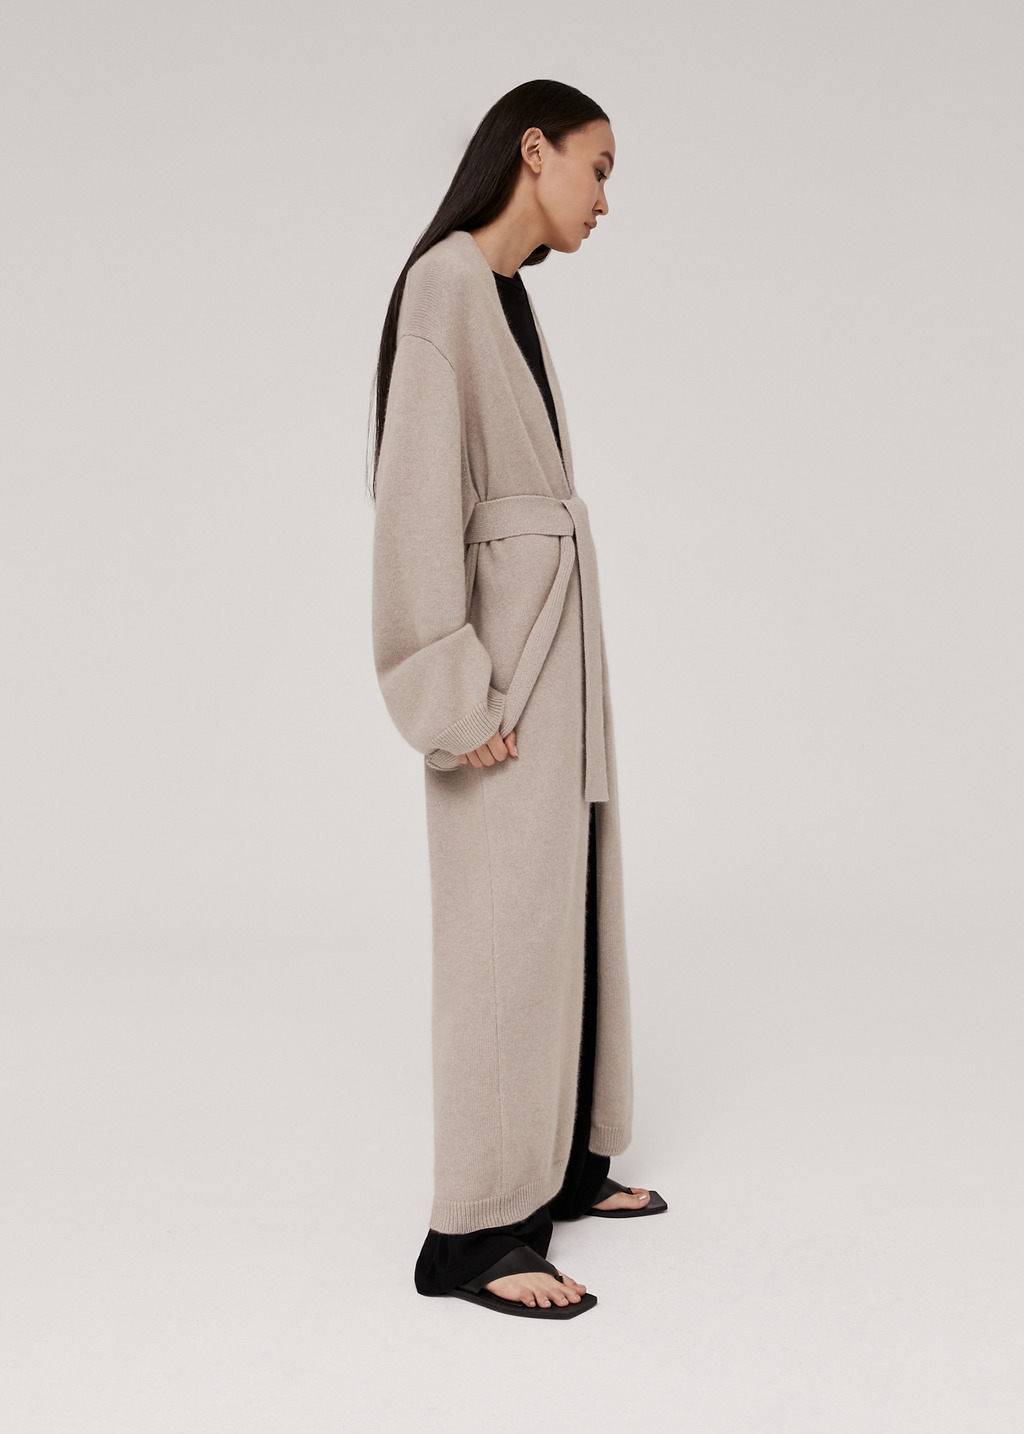 Cashmere > 100% cashmere oversized long cardigan Buy from e-shop